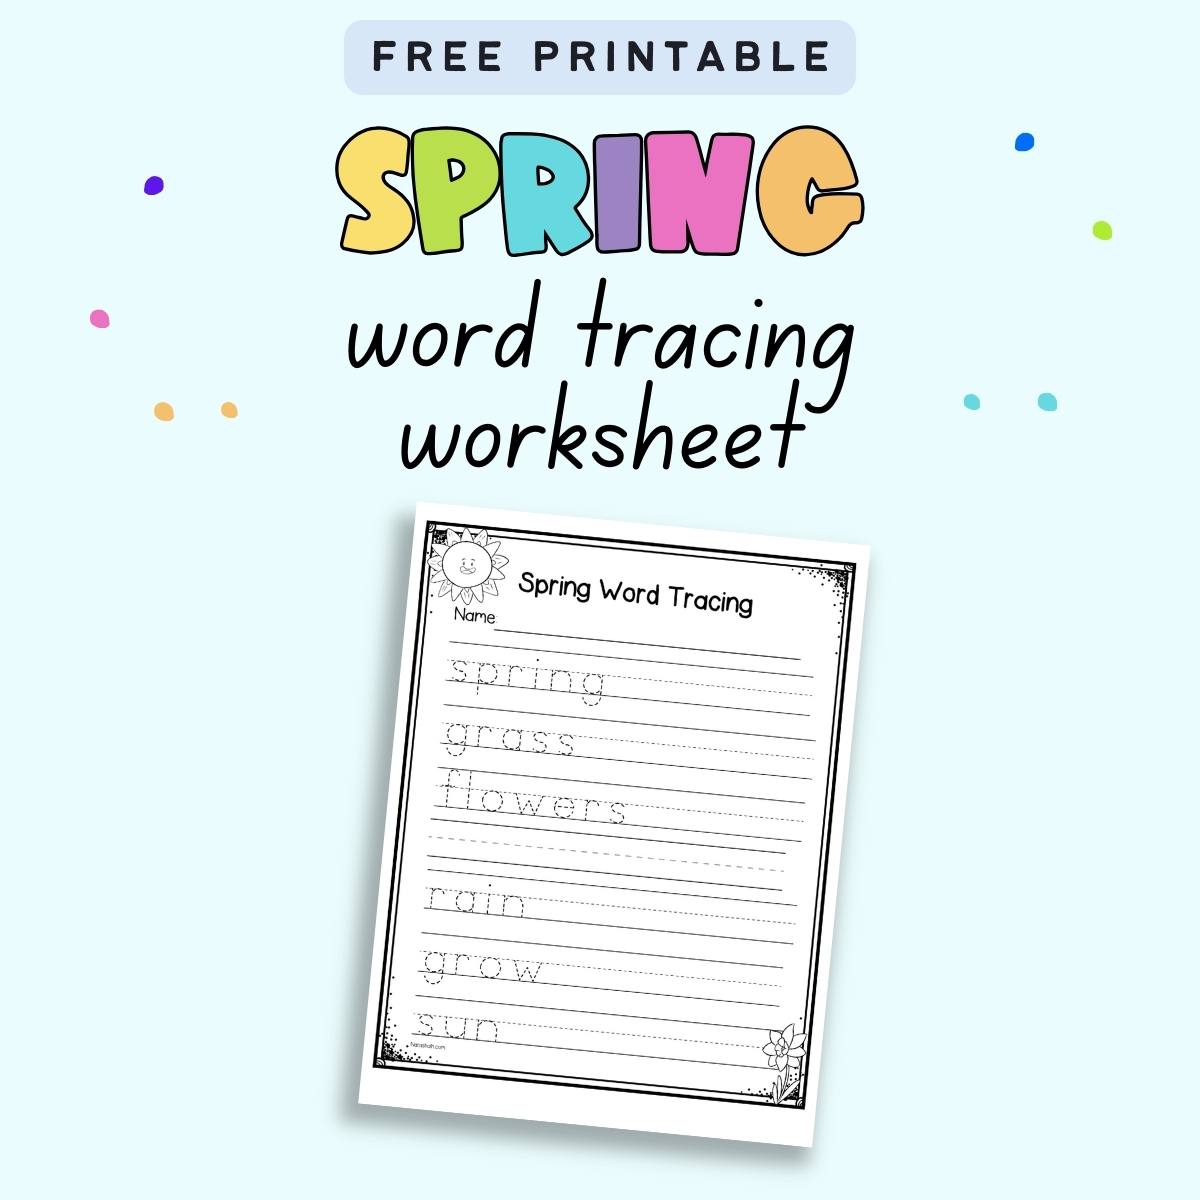 Text "free printable spring word tracing worksheet" with a preview of a worksheet with six spring vocabulary words to trace